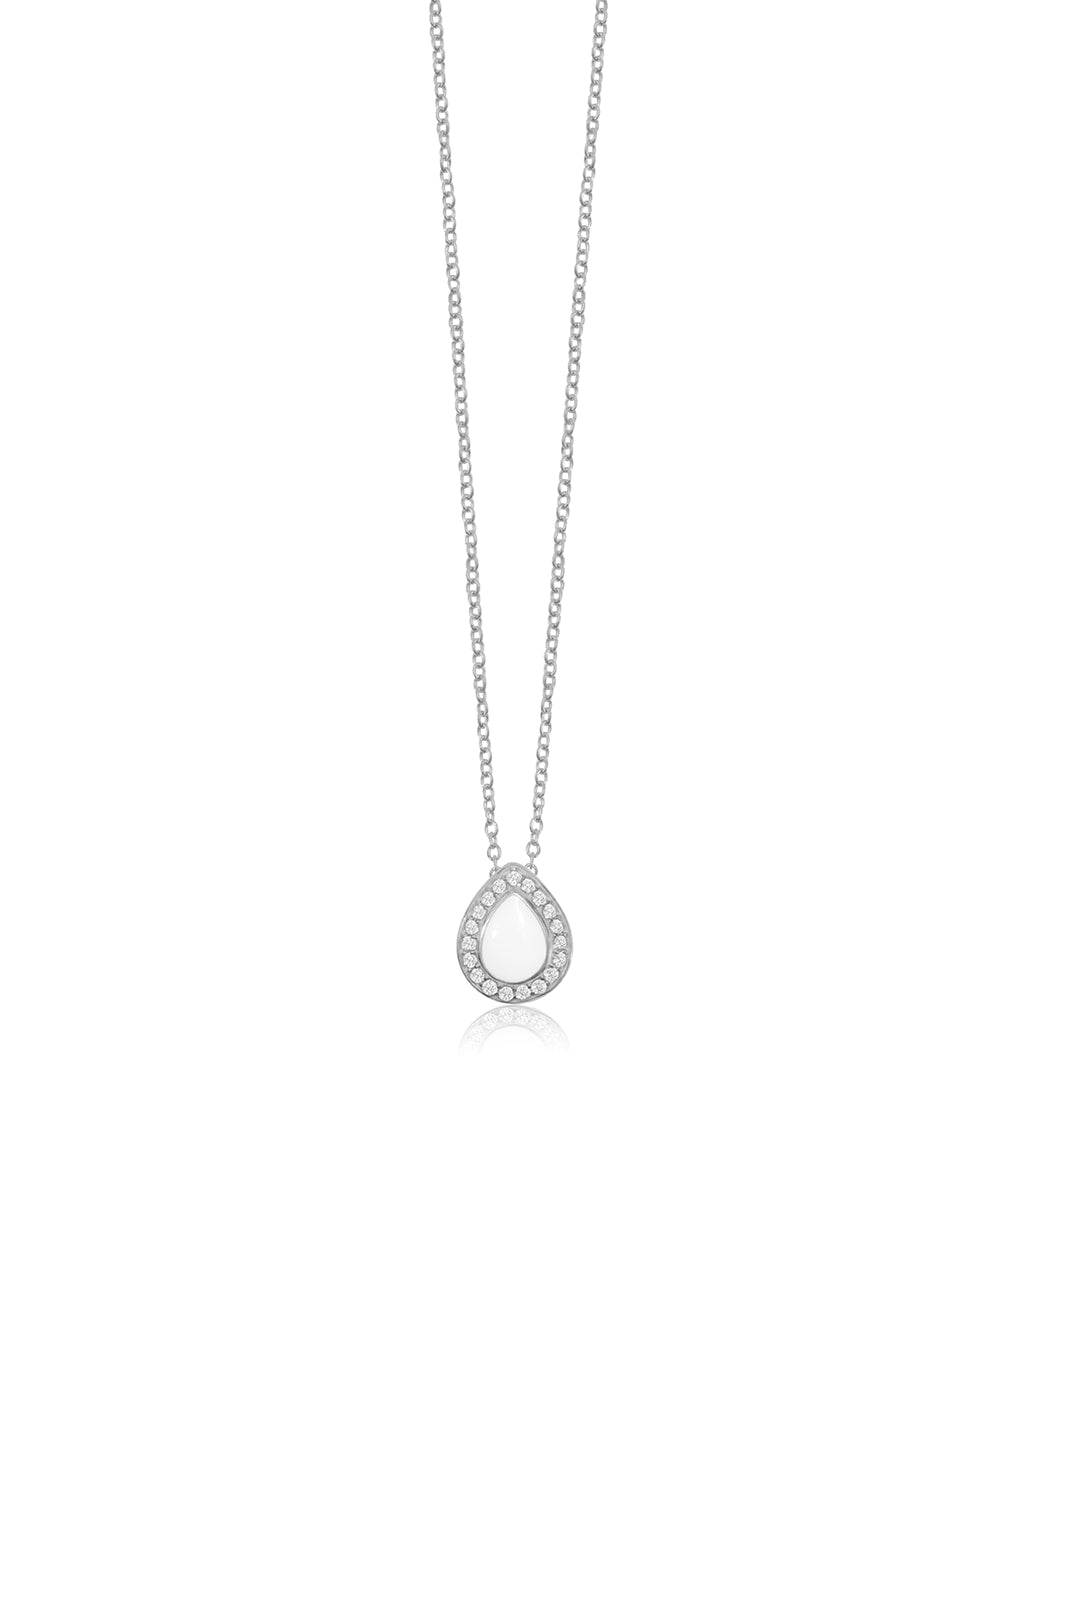 Halo Necklace - White Gold